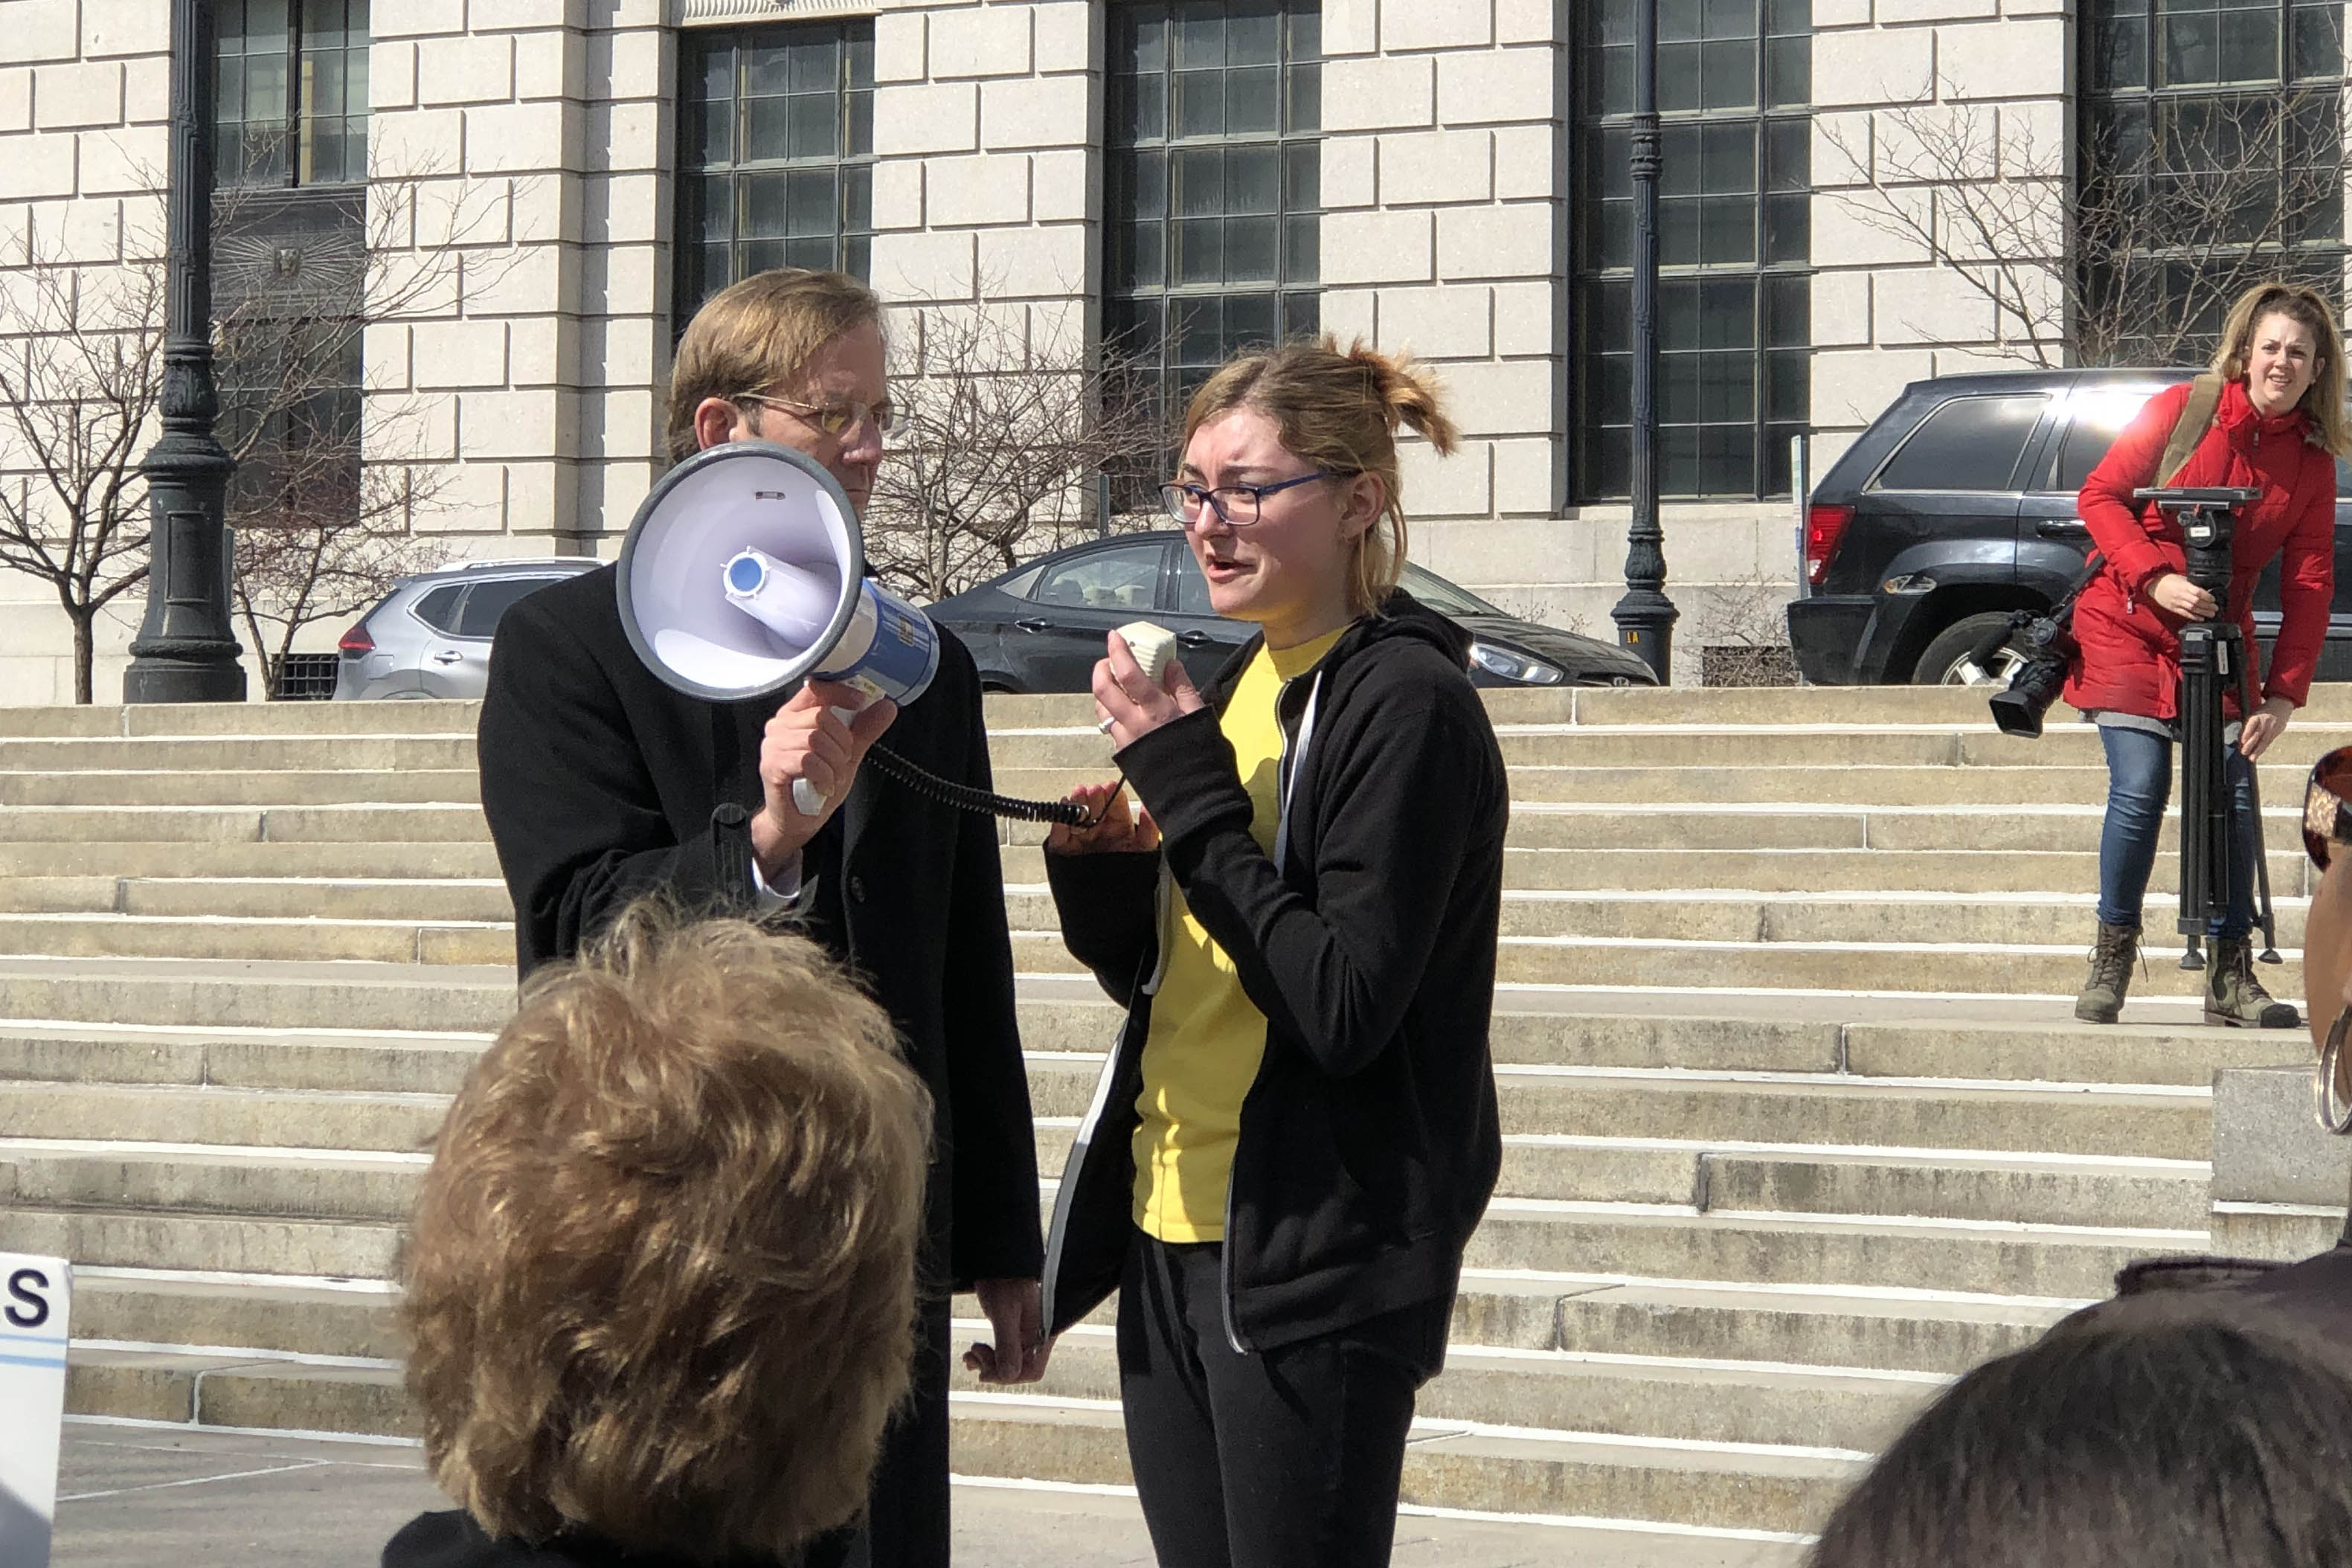 student speaking into a bullhorn